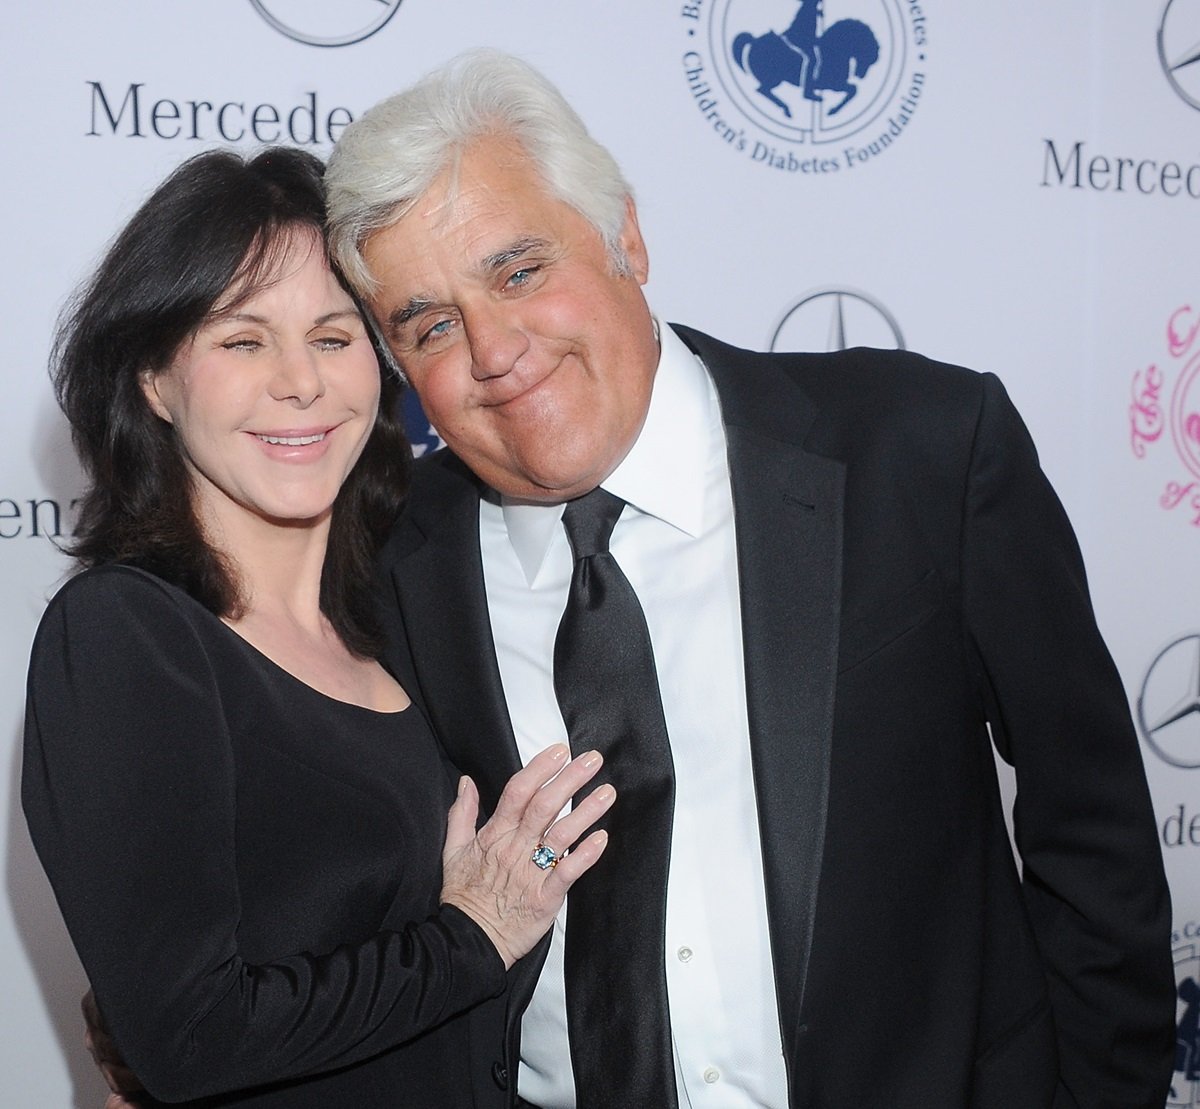 Mavis Leno and Jay Leno arrive at  the 2014 Carousel Of Hope Ball Presented By Mercedes-Benz at The Beverly Hilton Hotel on October 11, 2014